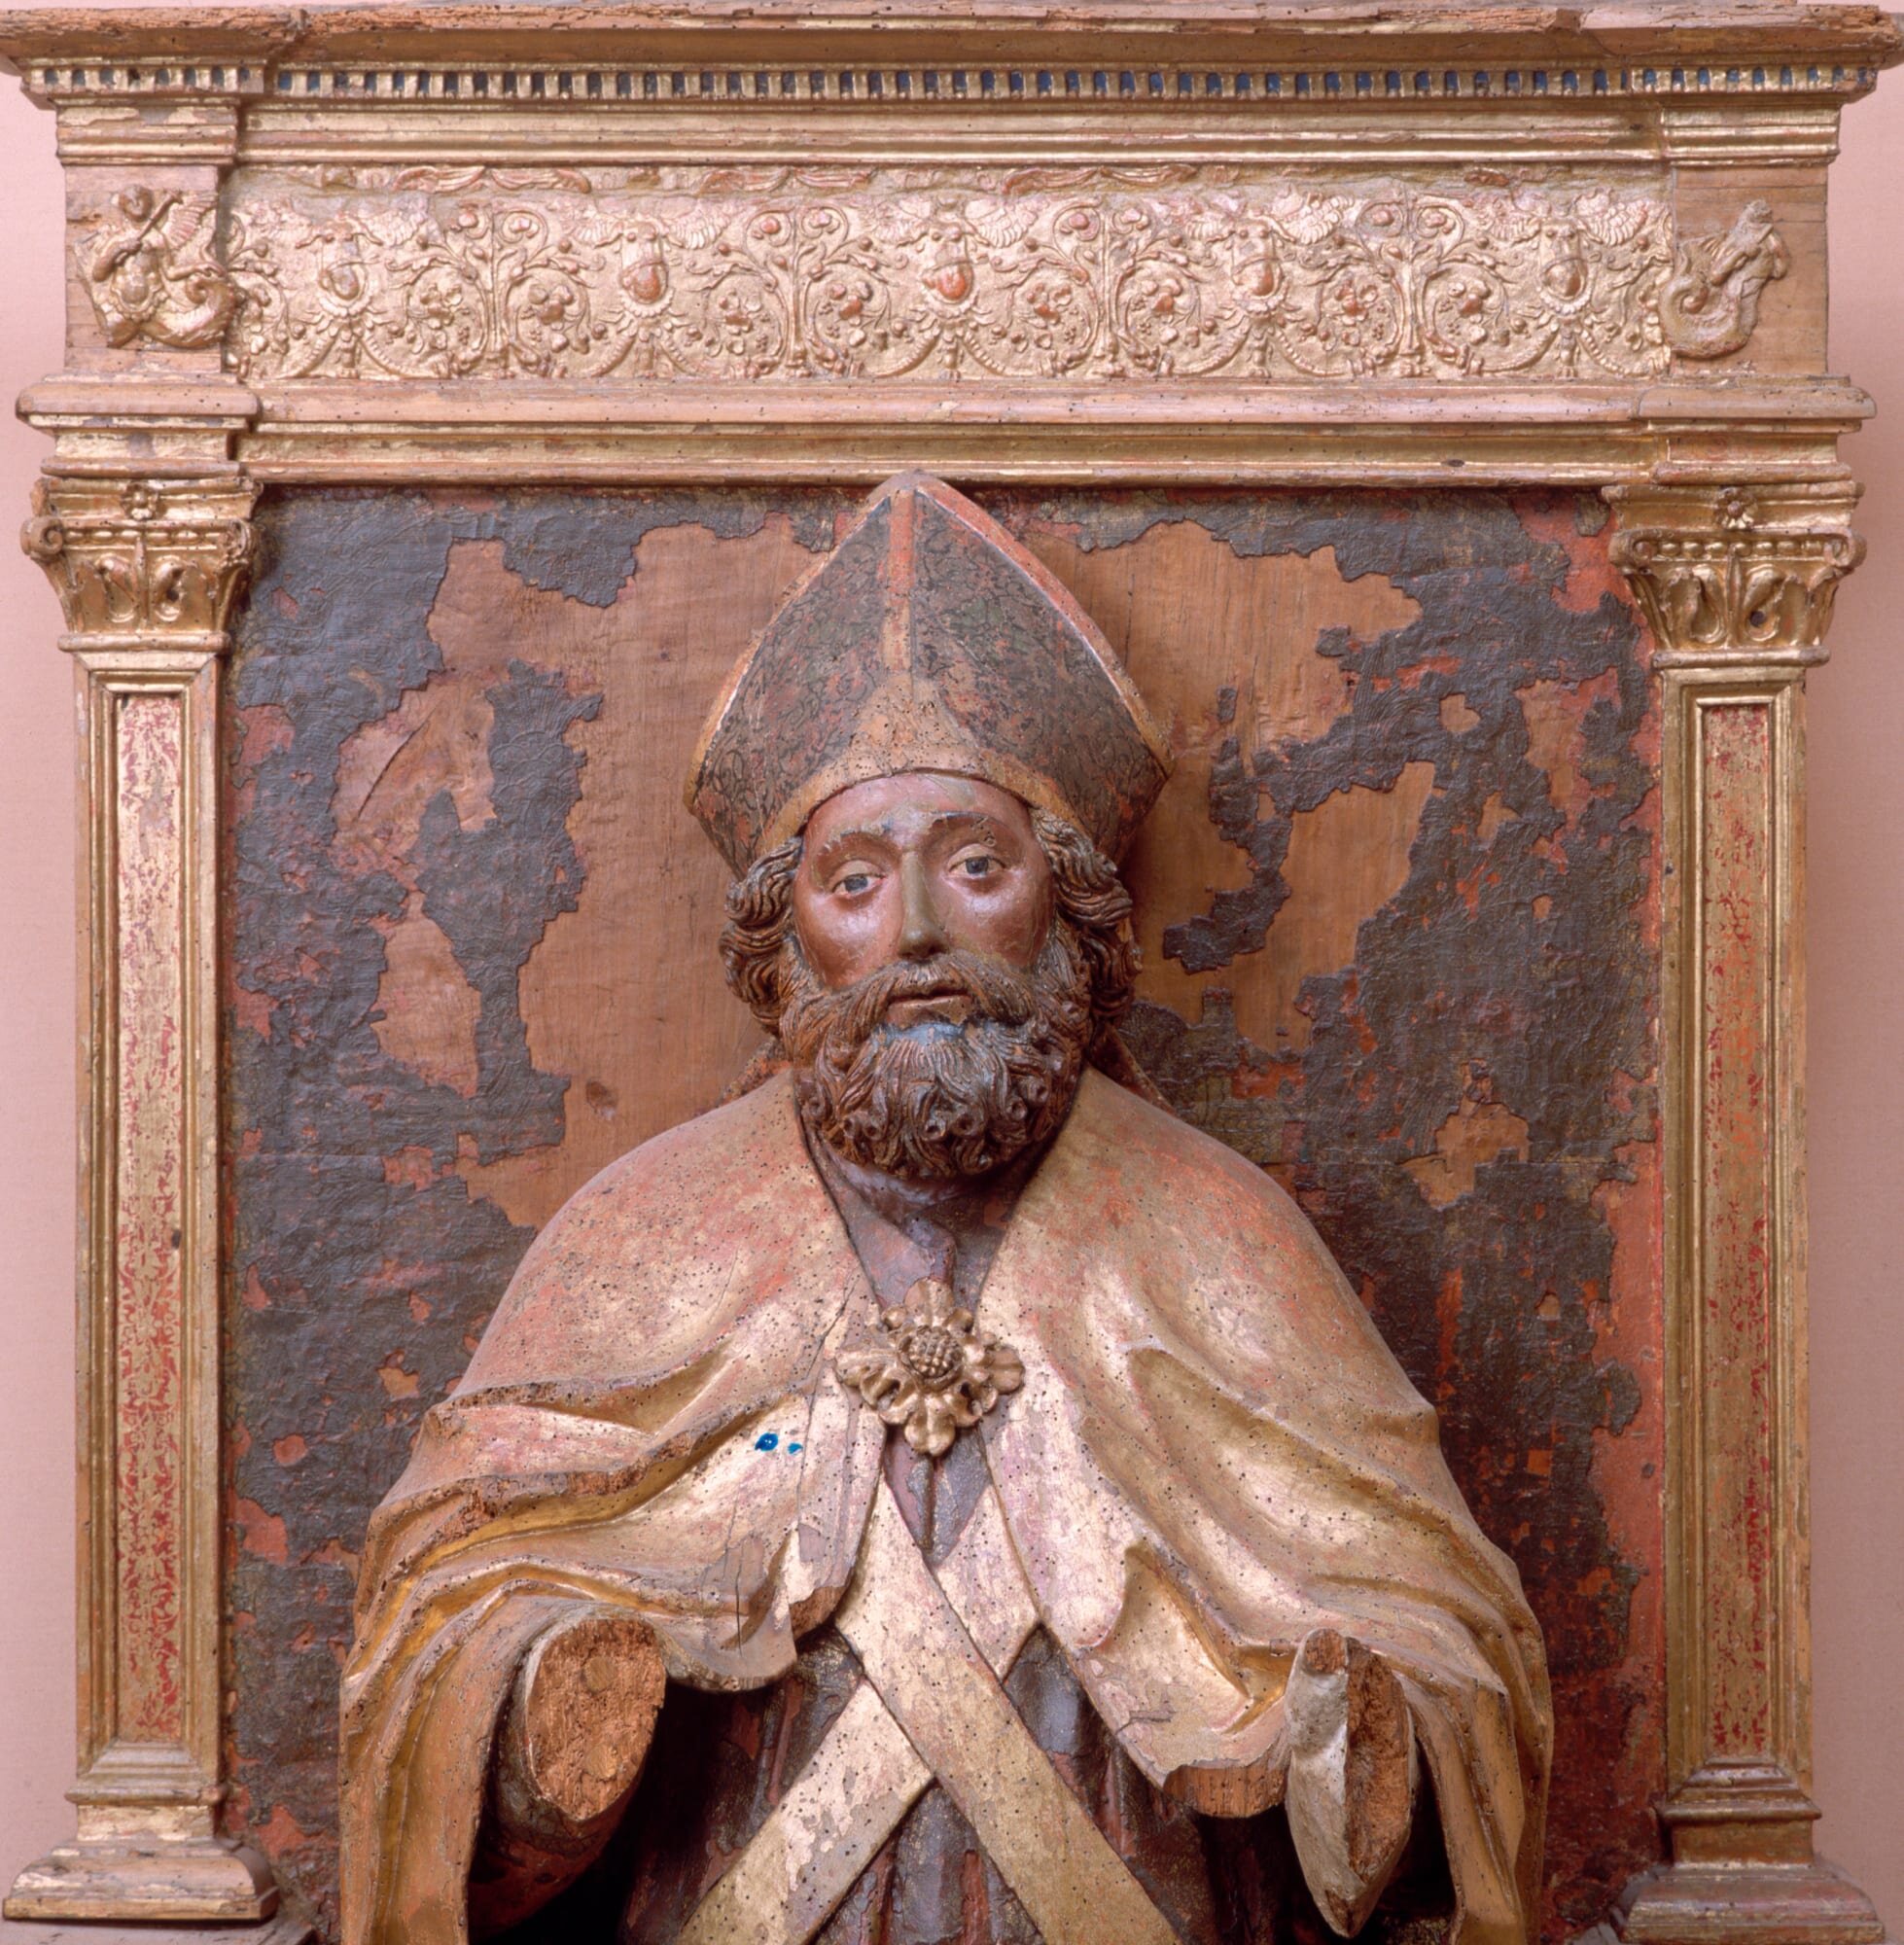  A 16th c. sculpture of St. Nicholas from the parish at Castello Daviano 